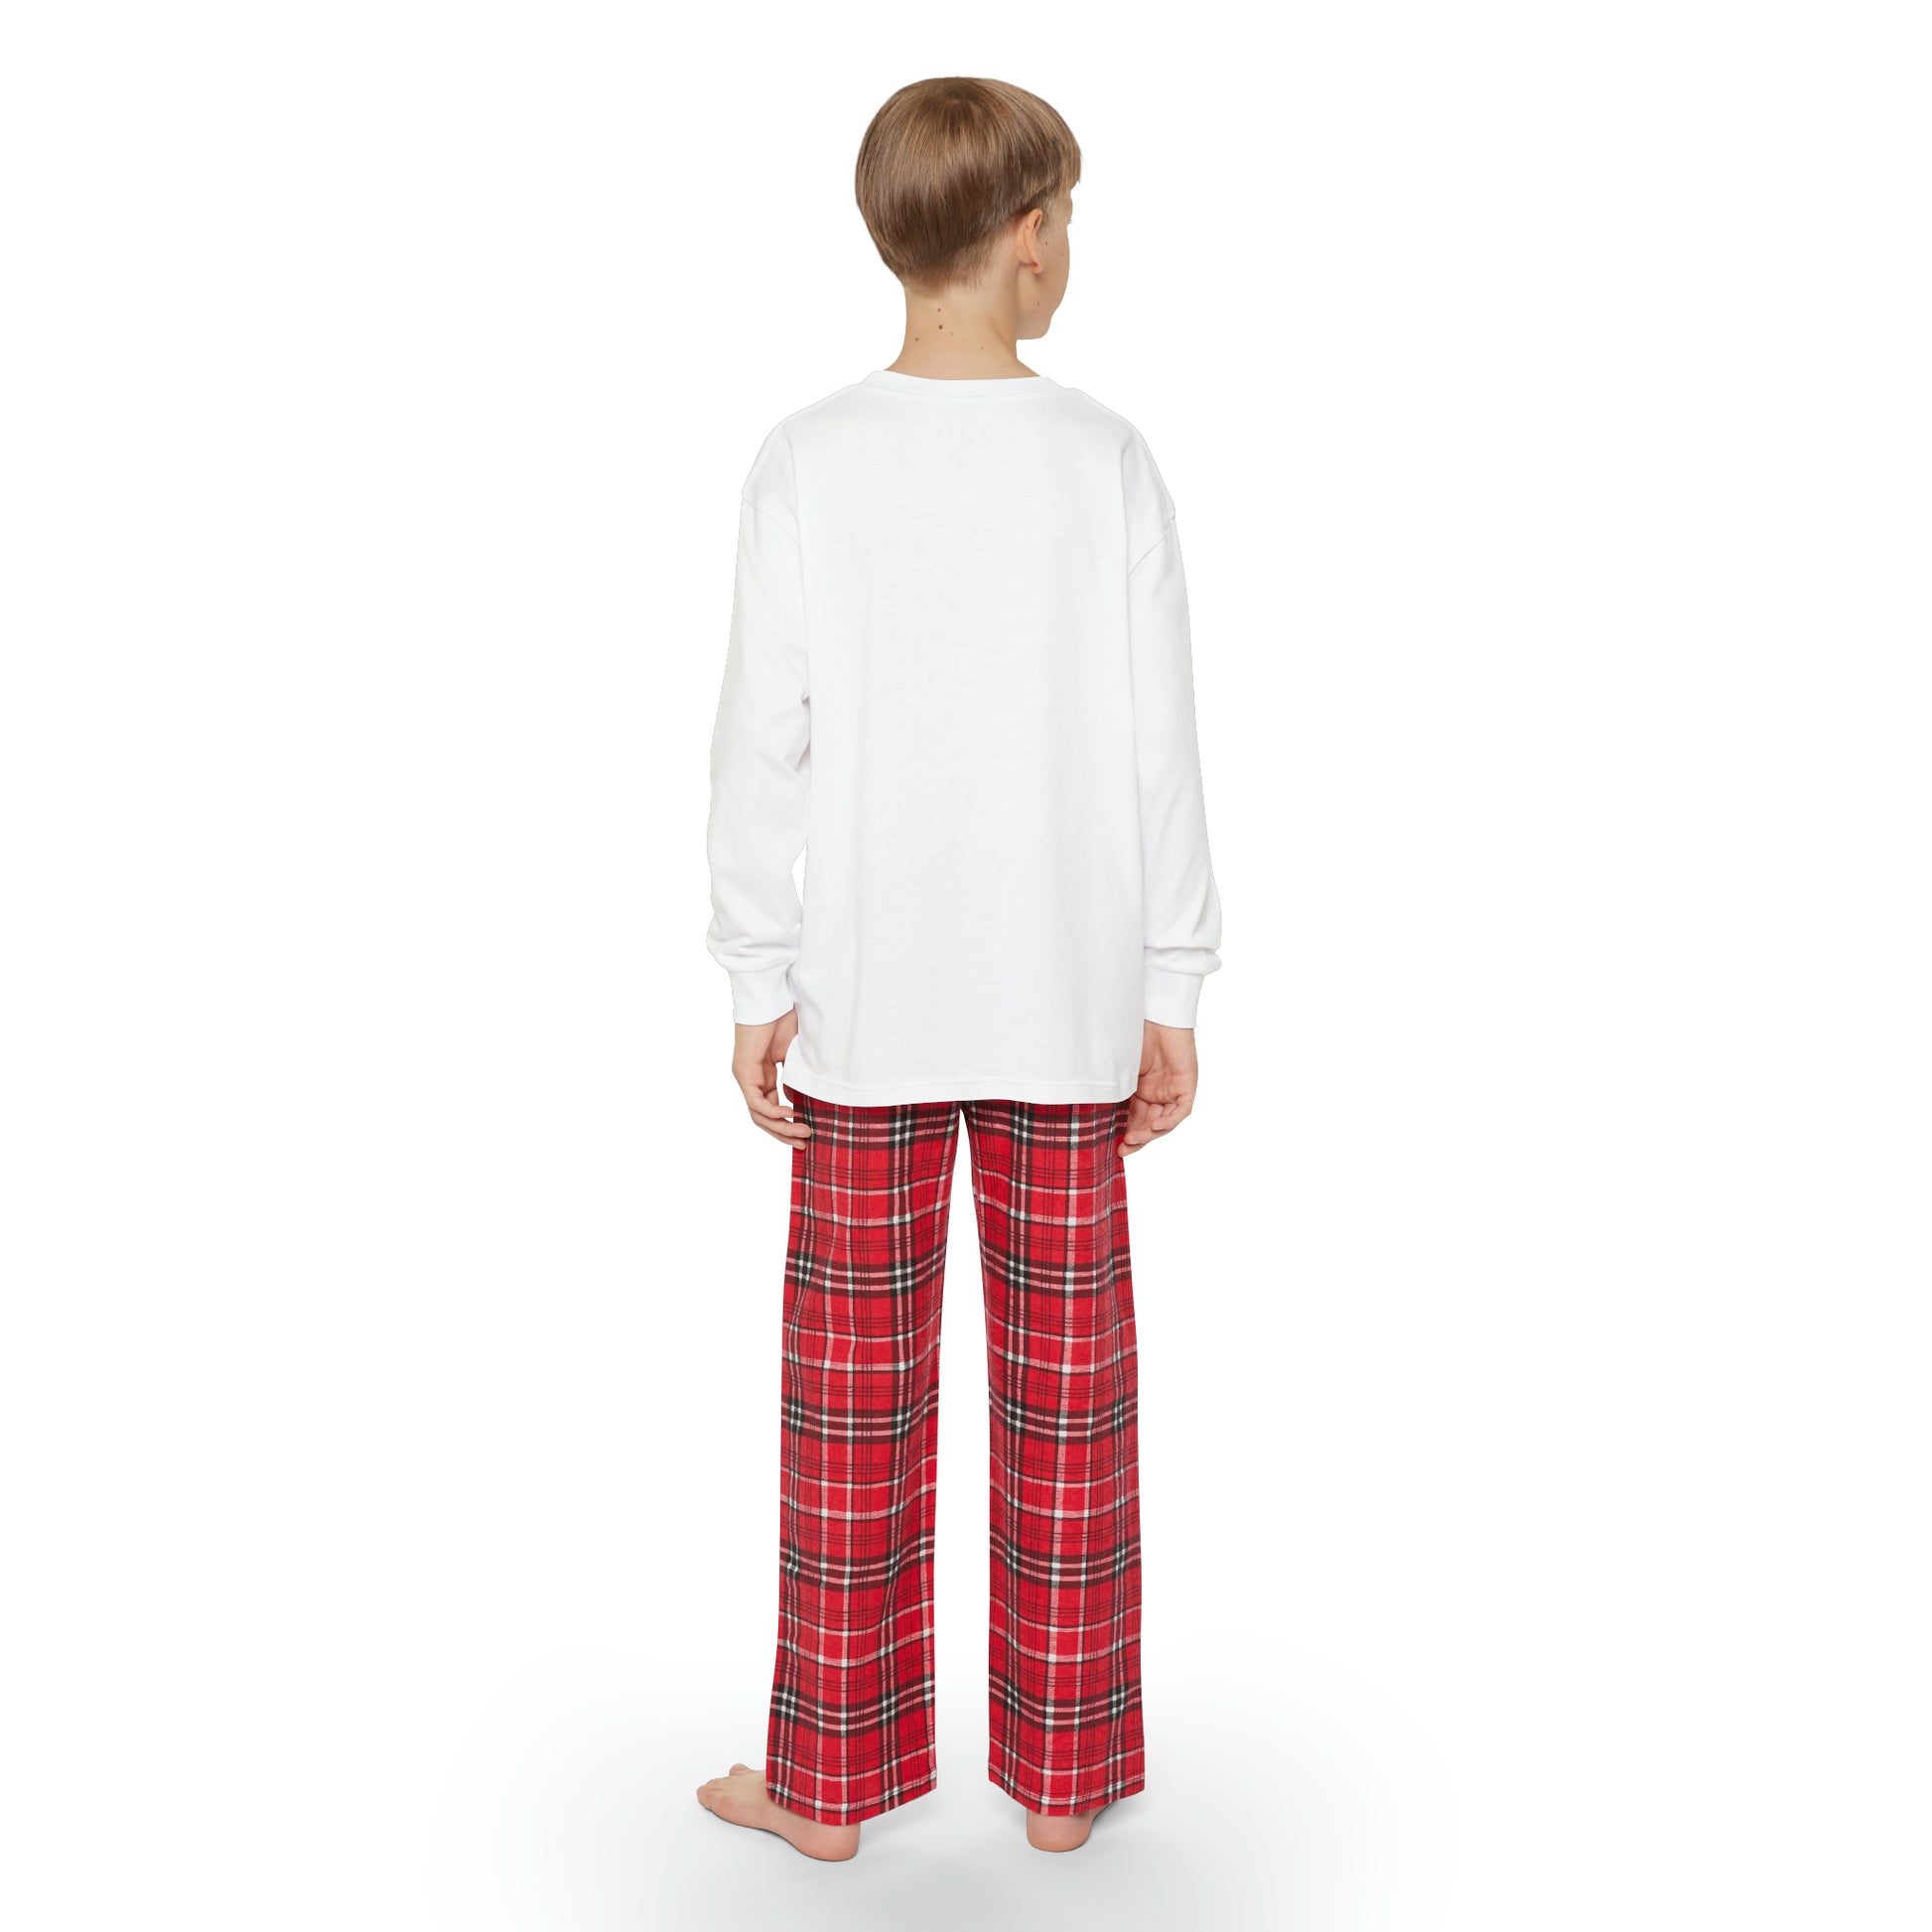 Divinely Inspired Purposefully Created Youth Christian Long Sleeve Pajama Set Printify